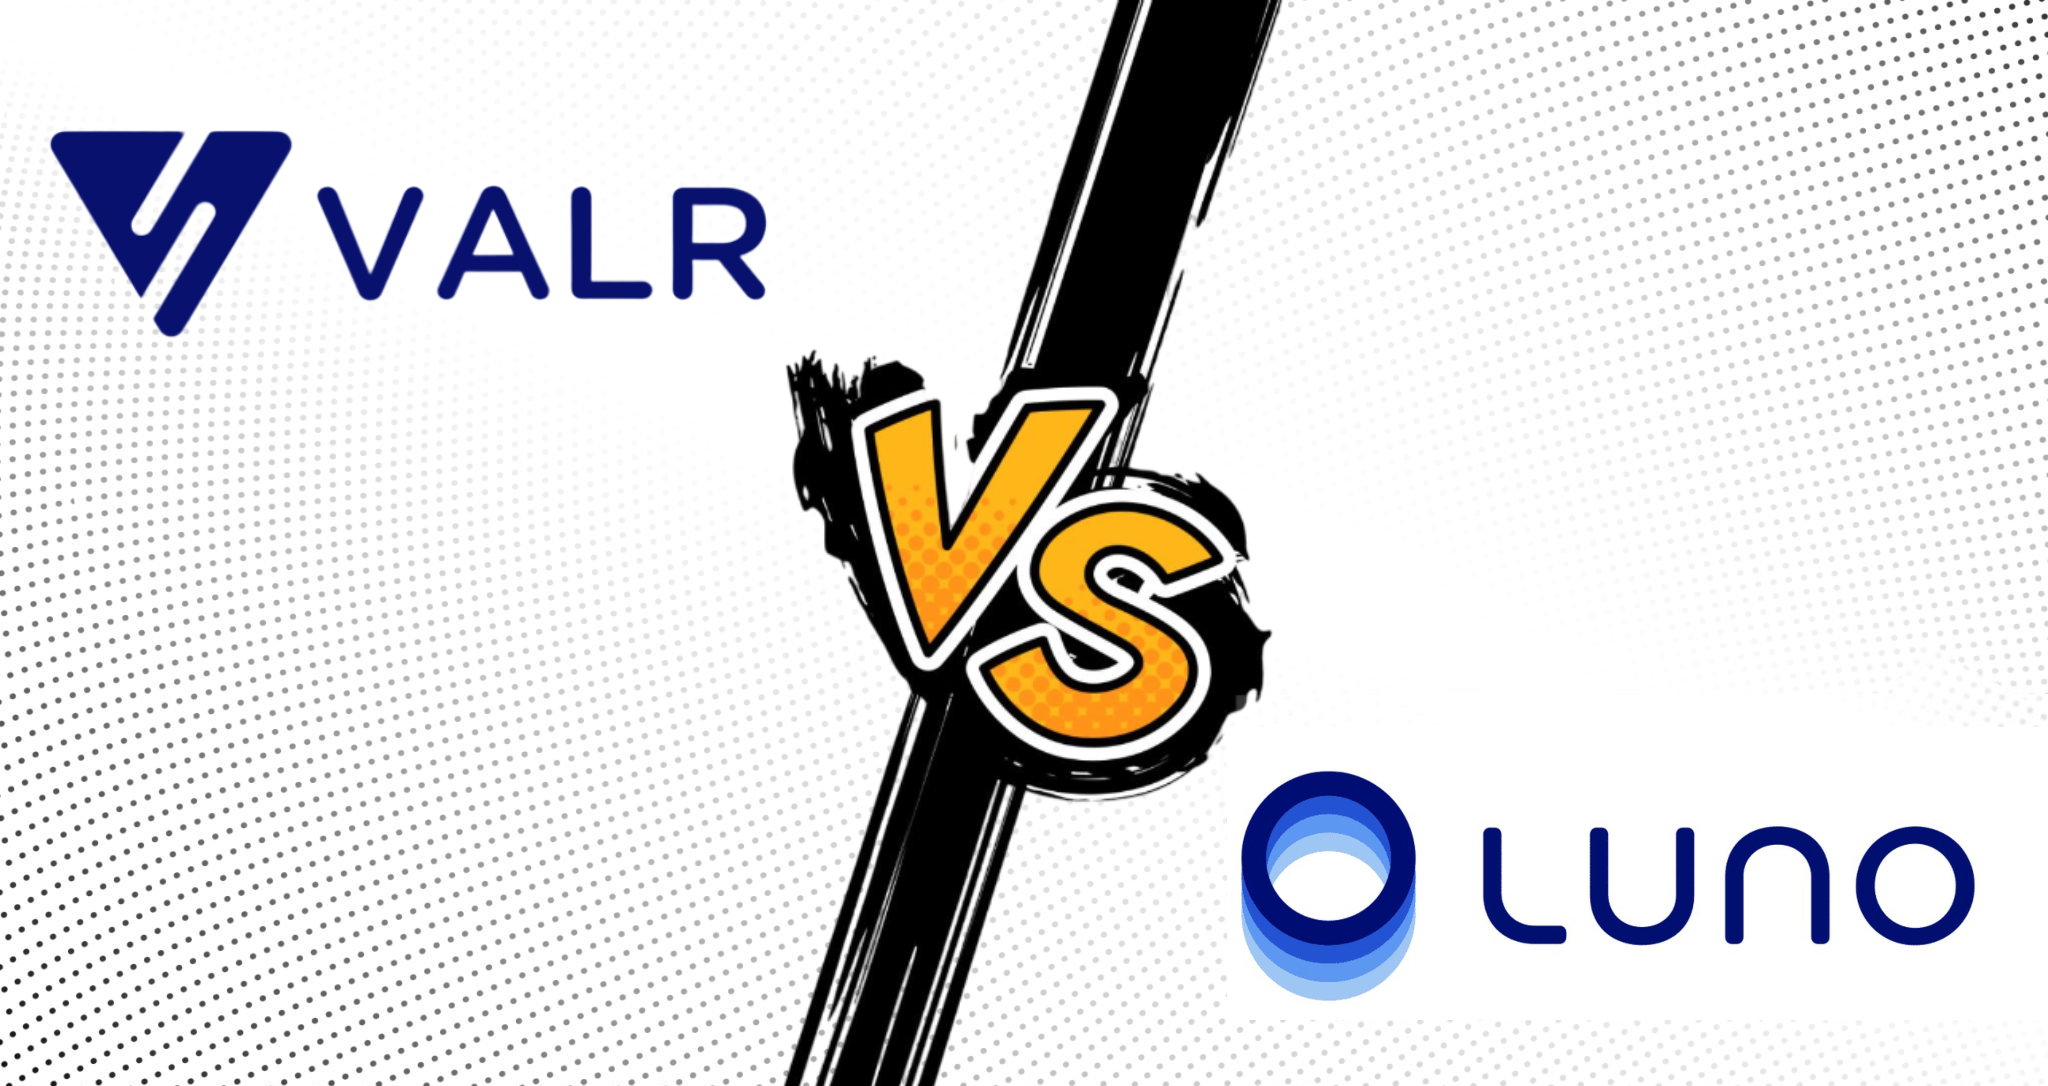 Choosing between VALR and Luno for your crypto trading needs in South Africa? Our comprehensive VALR vs Luno review weighs the pros and cons of each exchange, from fees and supported assets to security, regulation, and user experience.